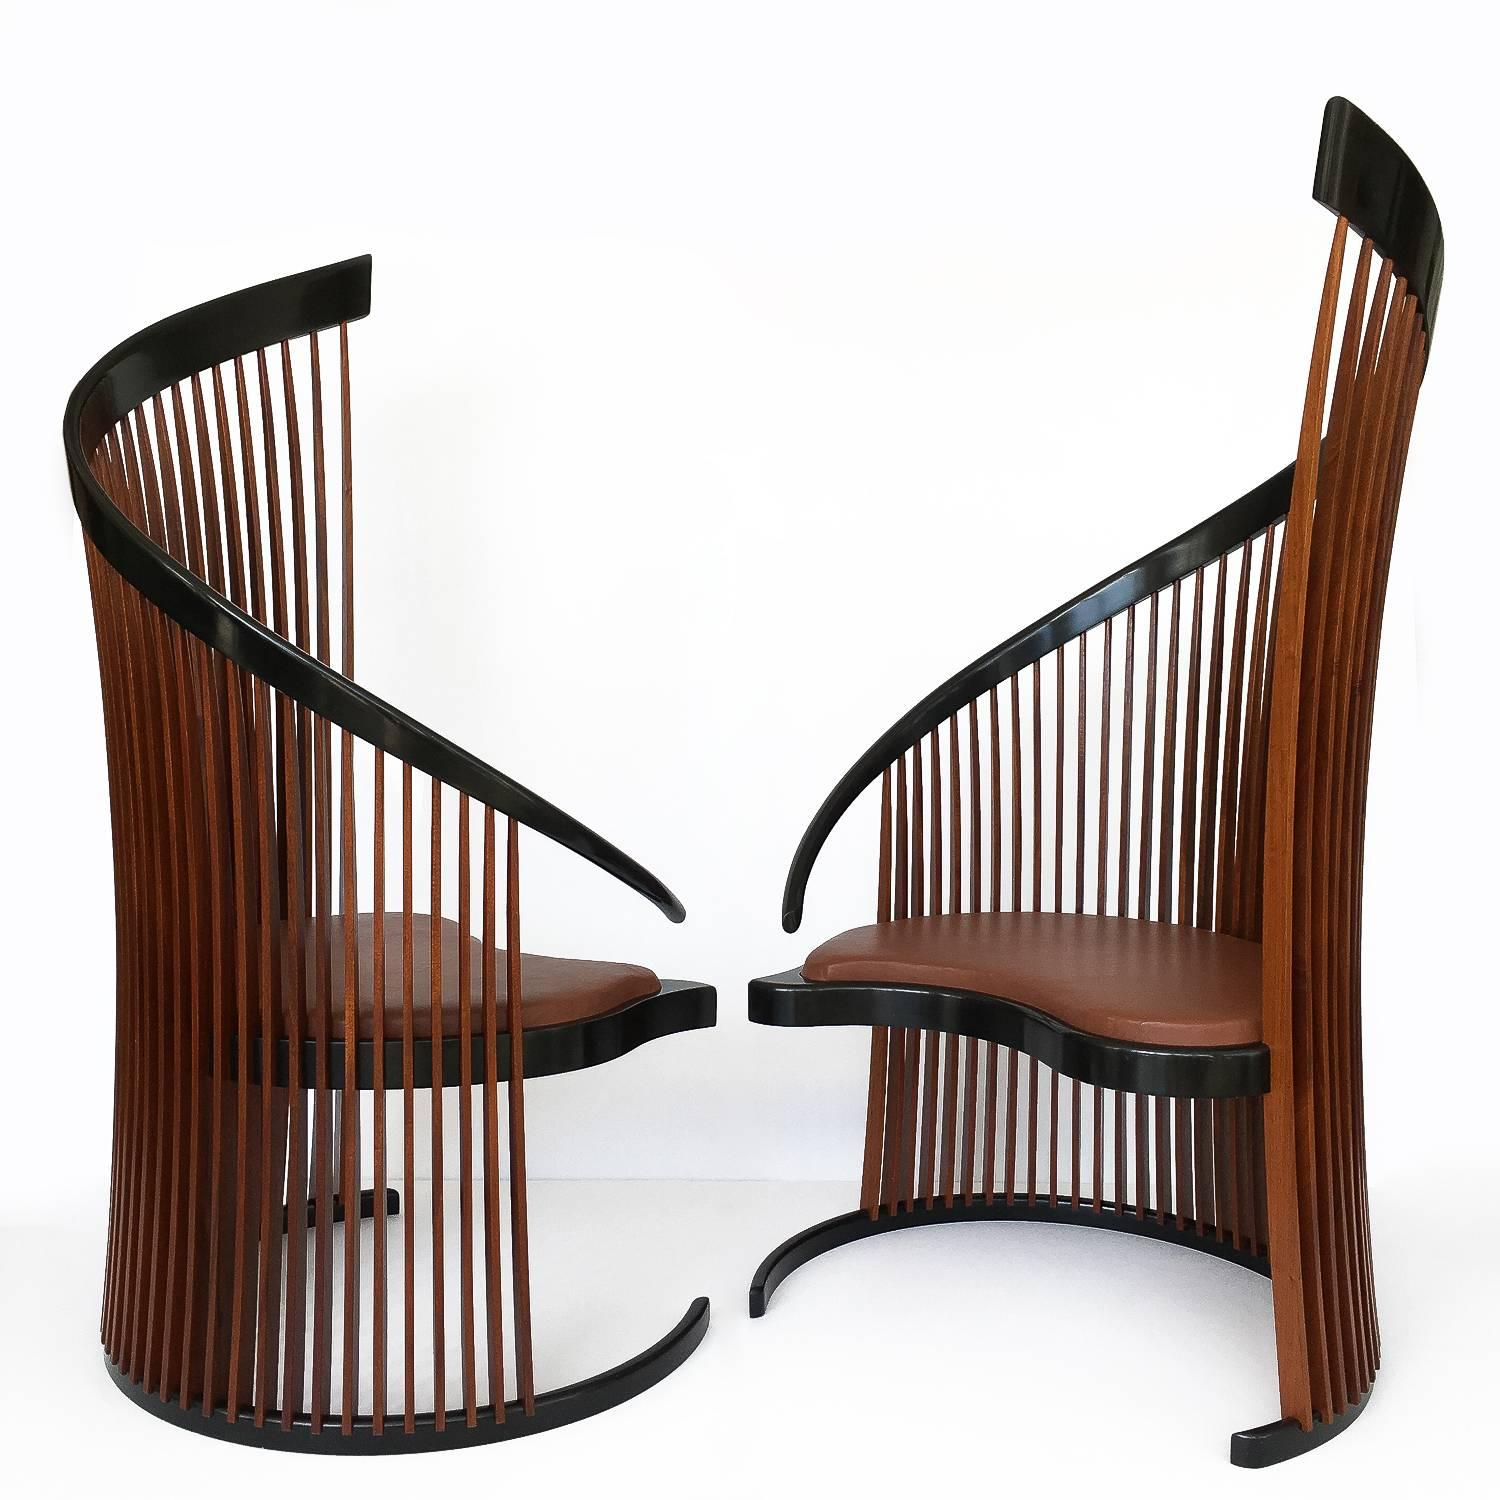 American Studio Craft Movement pair of Paso Doble sculptural high back slatted chairs by Thomas Stender. These identical chairs are designed as a separable tête-à-tête and their inspired design suggests flamenco dancers. Thomas Stender draws